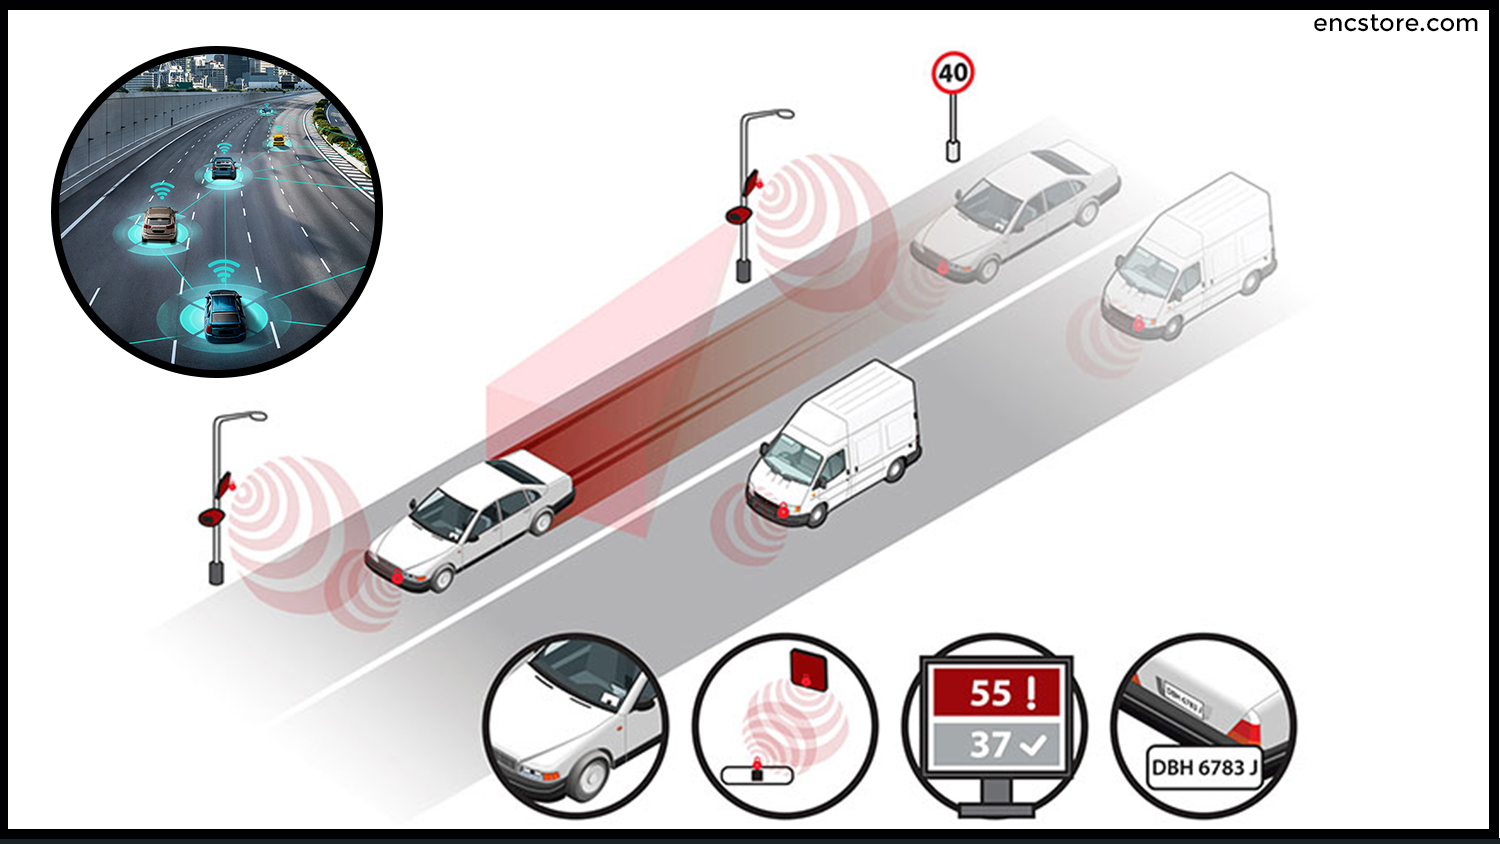 RFID Used For Tracking Vehicles